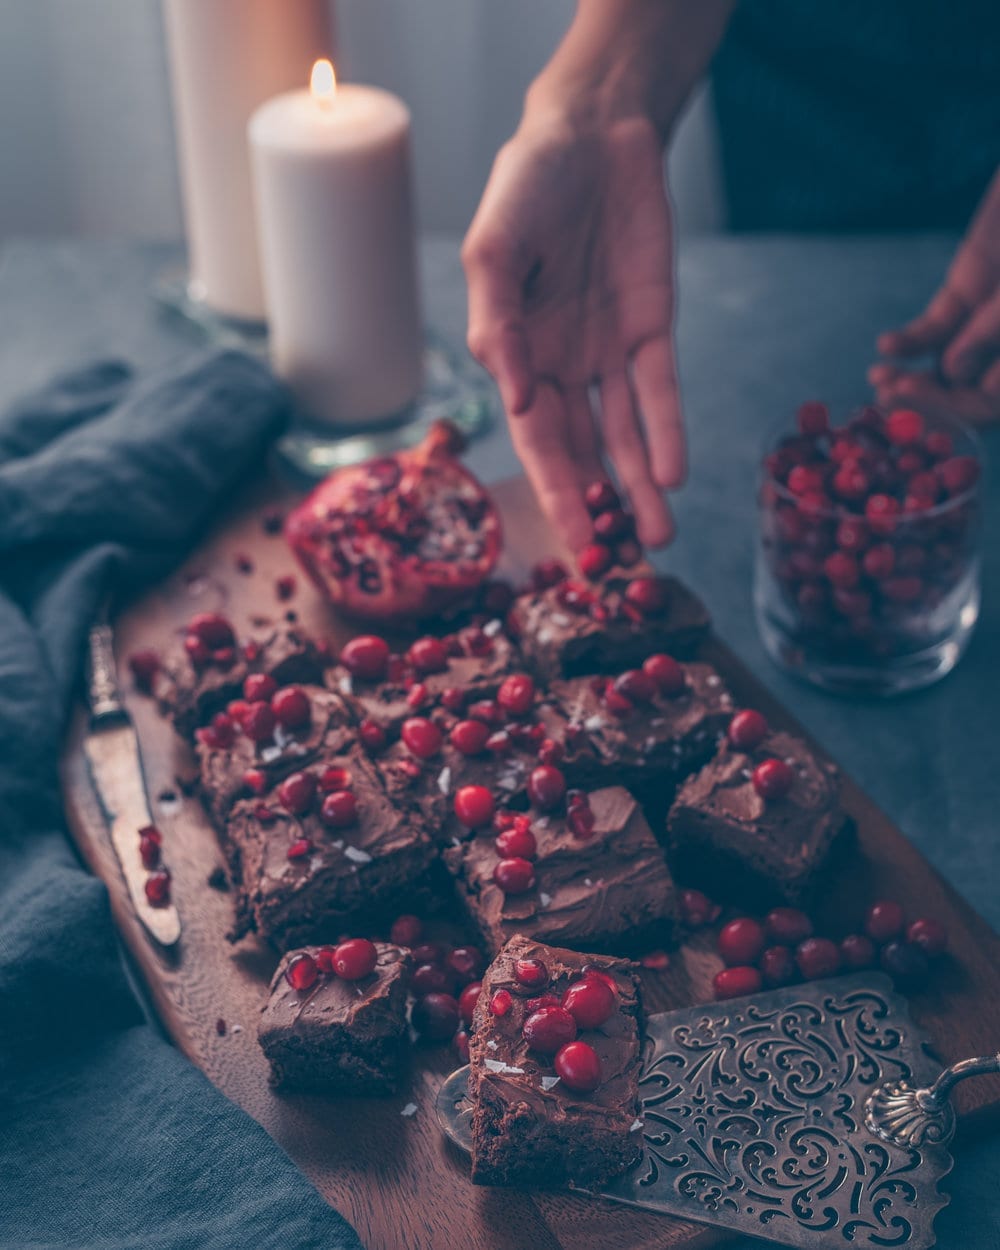 Hand dropping cranberries onto brownies on a wooden cutting board.